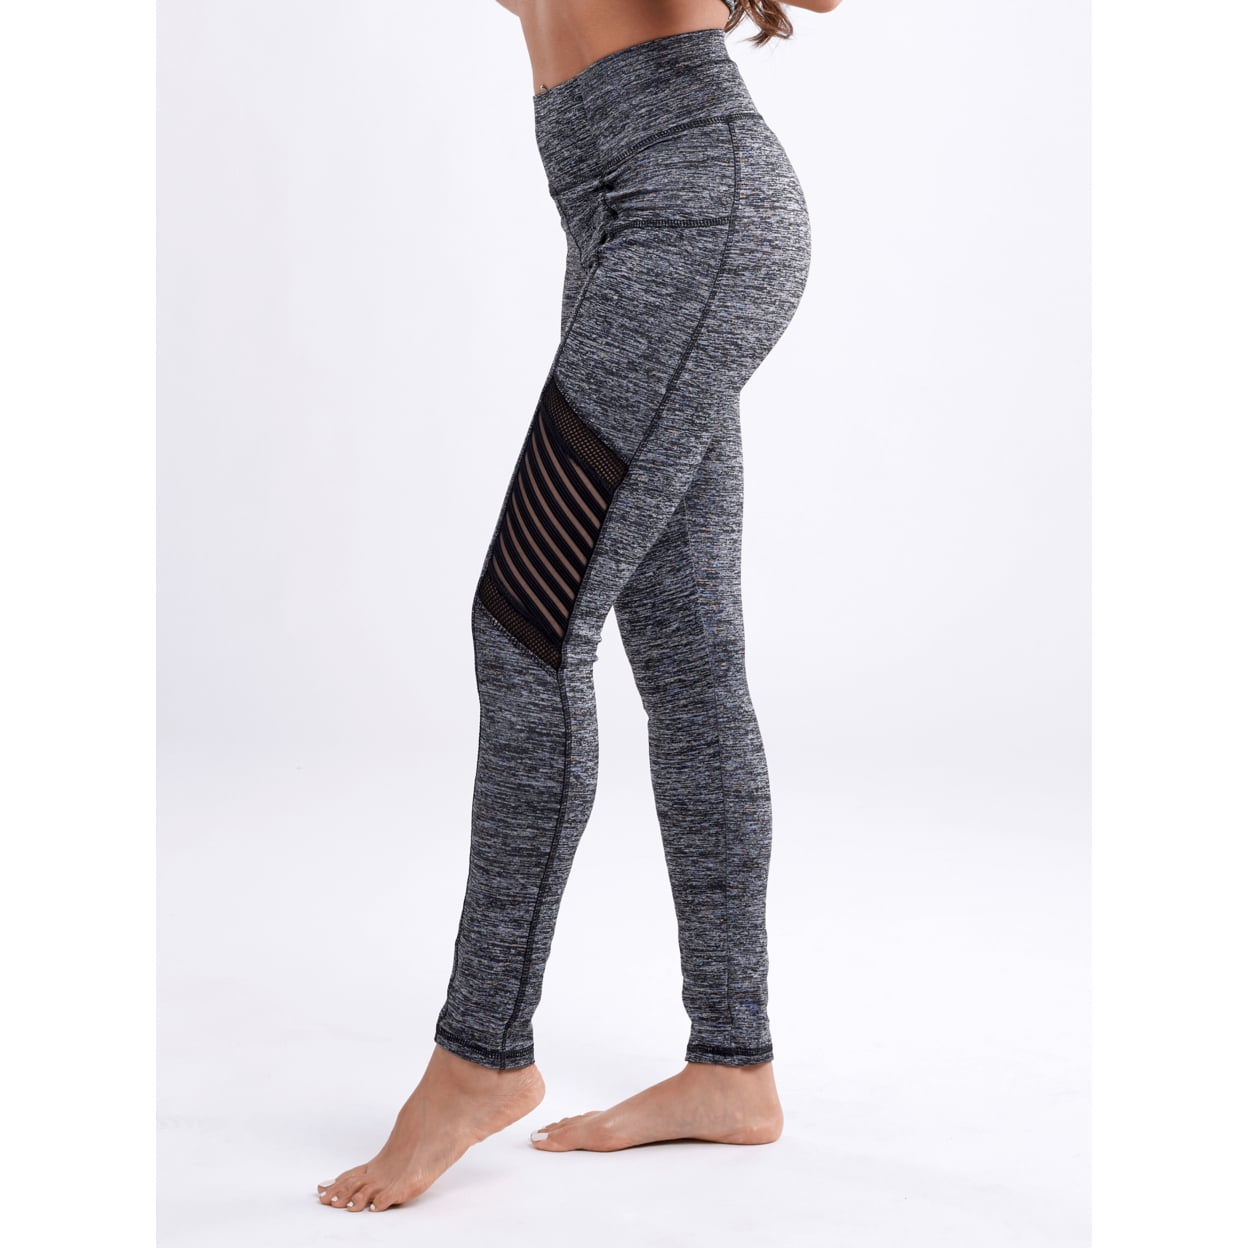 Top Rated Products in Women's Leggings